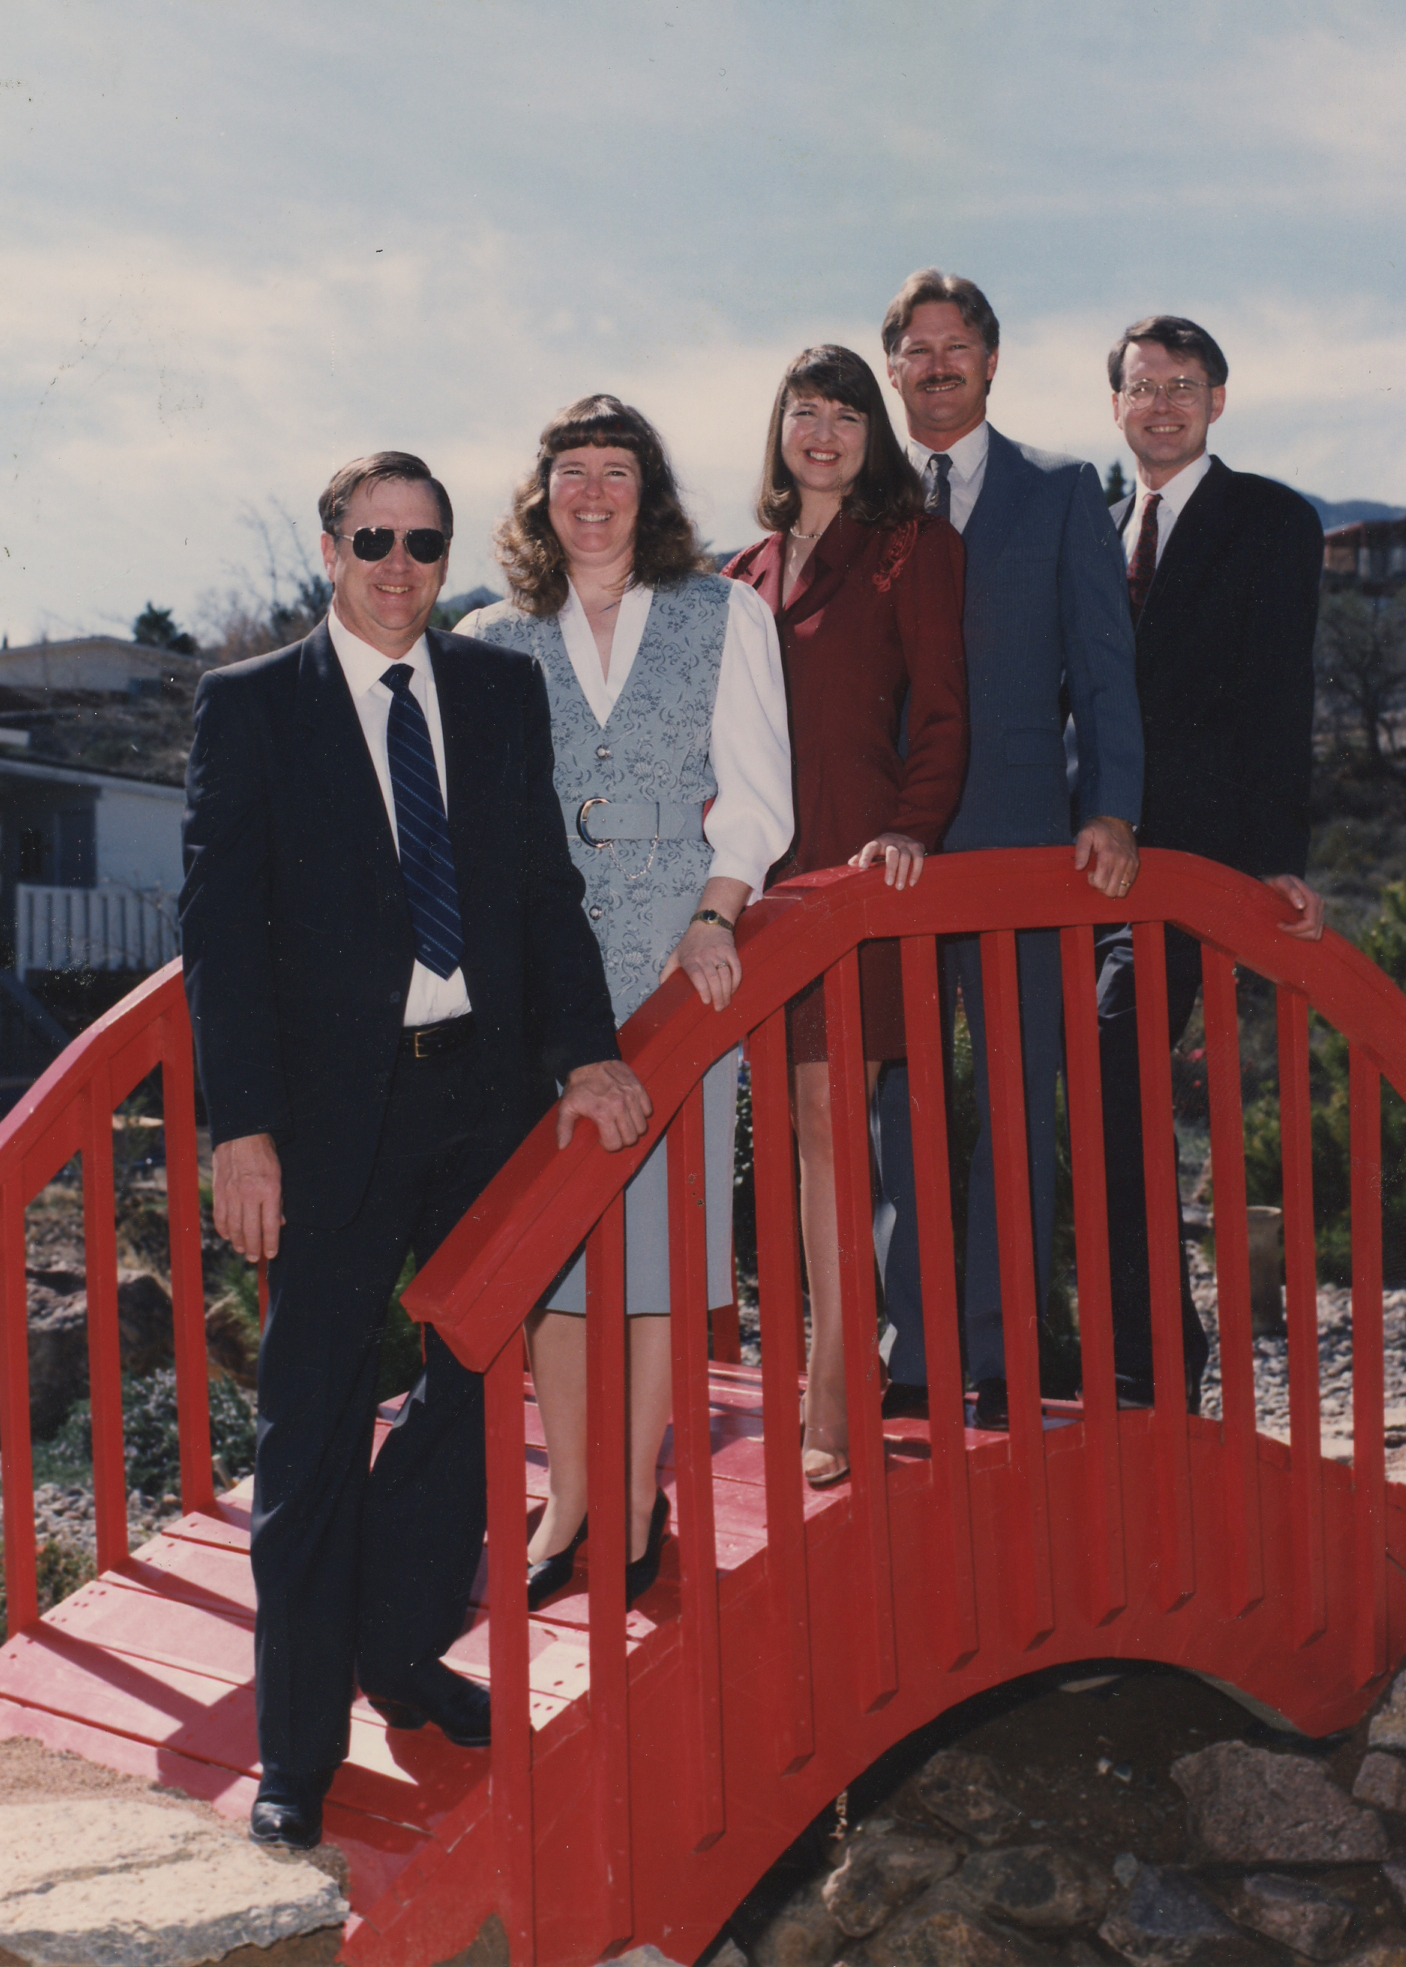 The siblings Frank T. James, Susan Niehans, Ann James Massey, Keith B. James and Paul A. James in 1995 on the bridge our father built over the small ravine in the park across the street from our family home in Mountain Park.